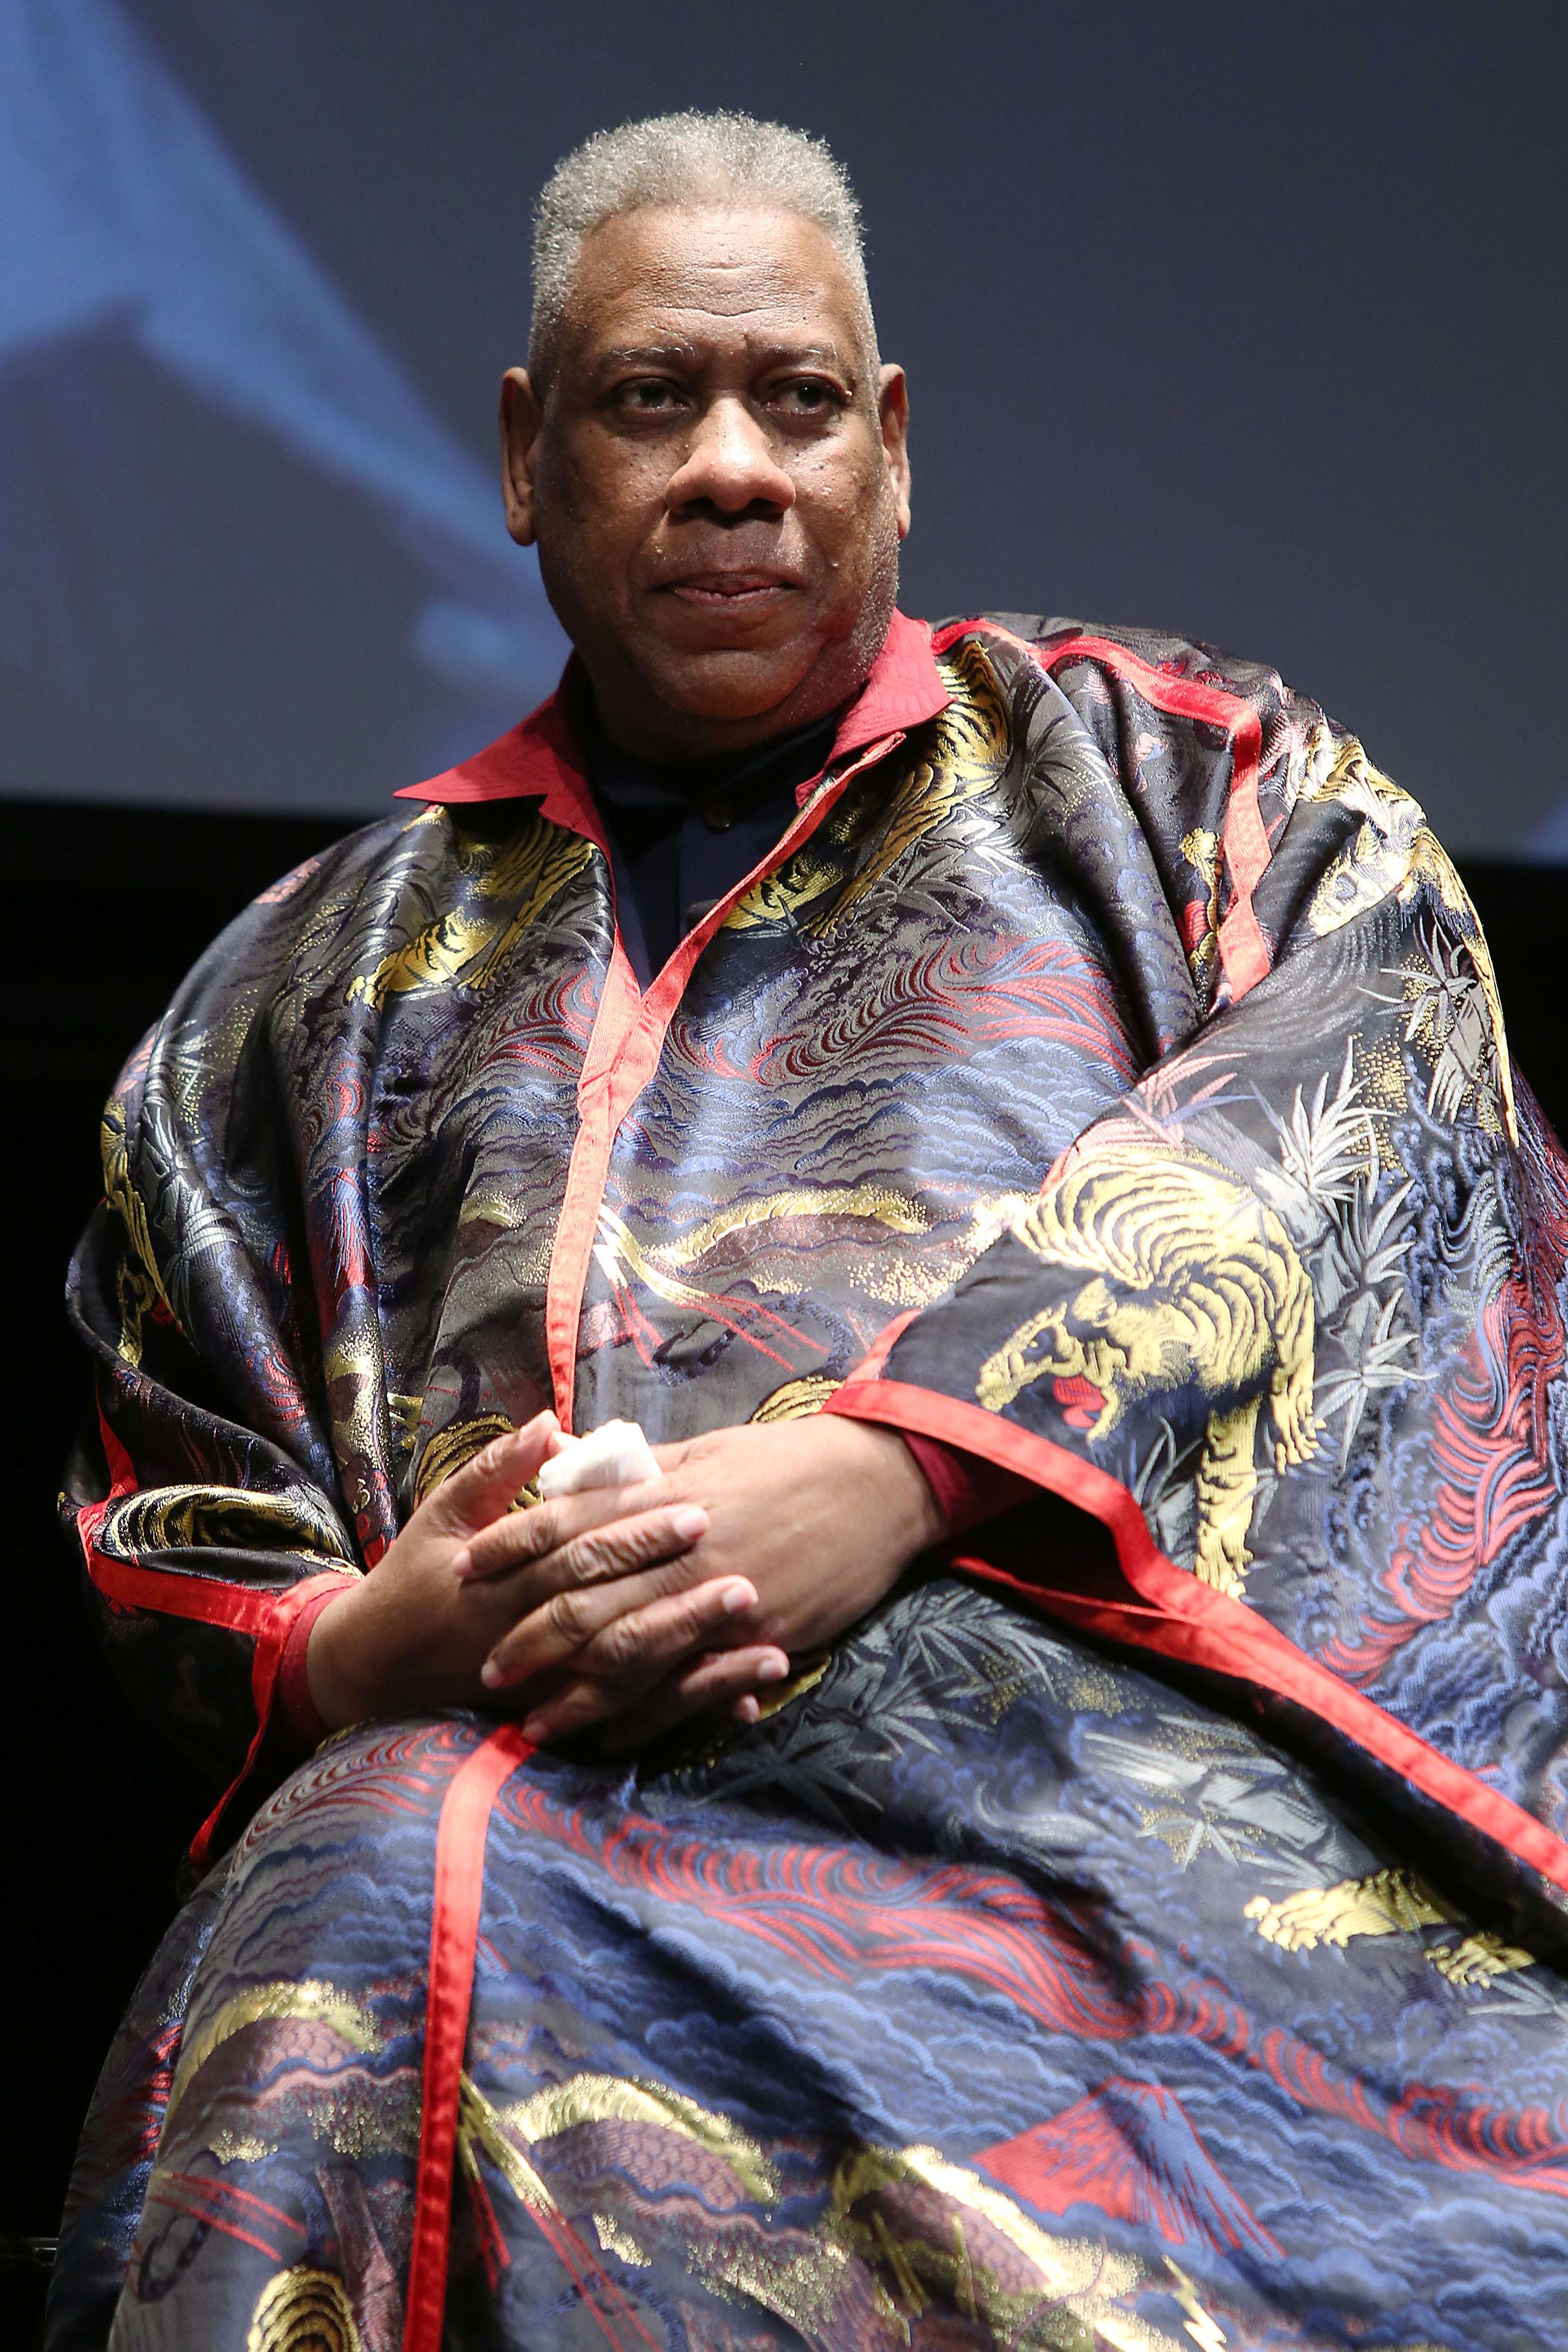 André Leon Talley: Eviction, Bankruptcy and Fashion Grift - The